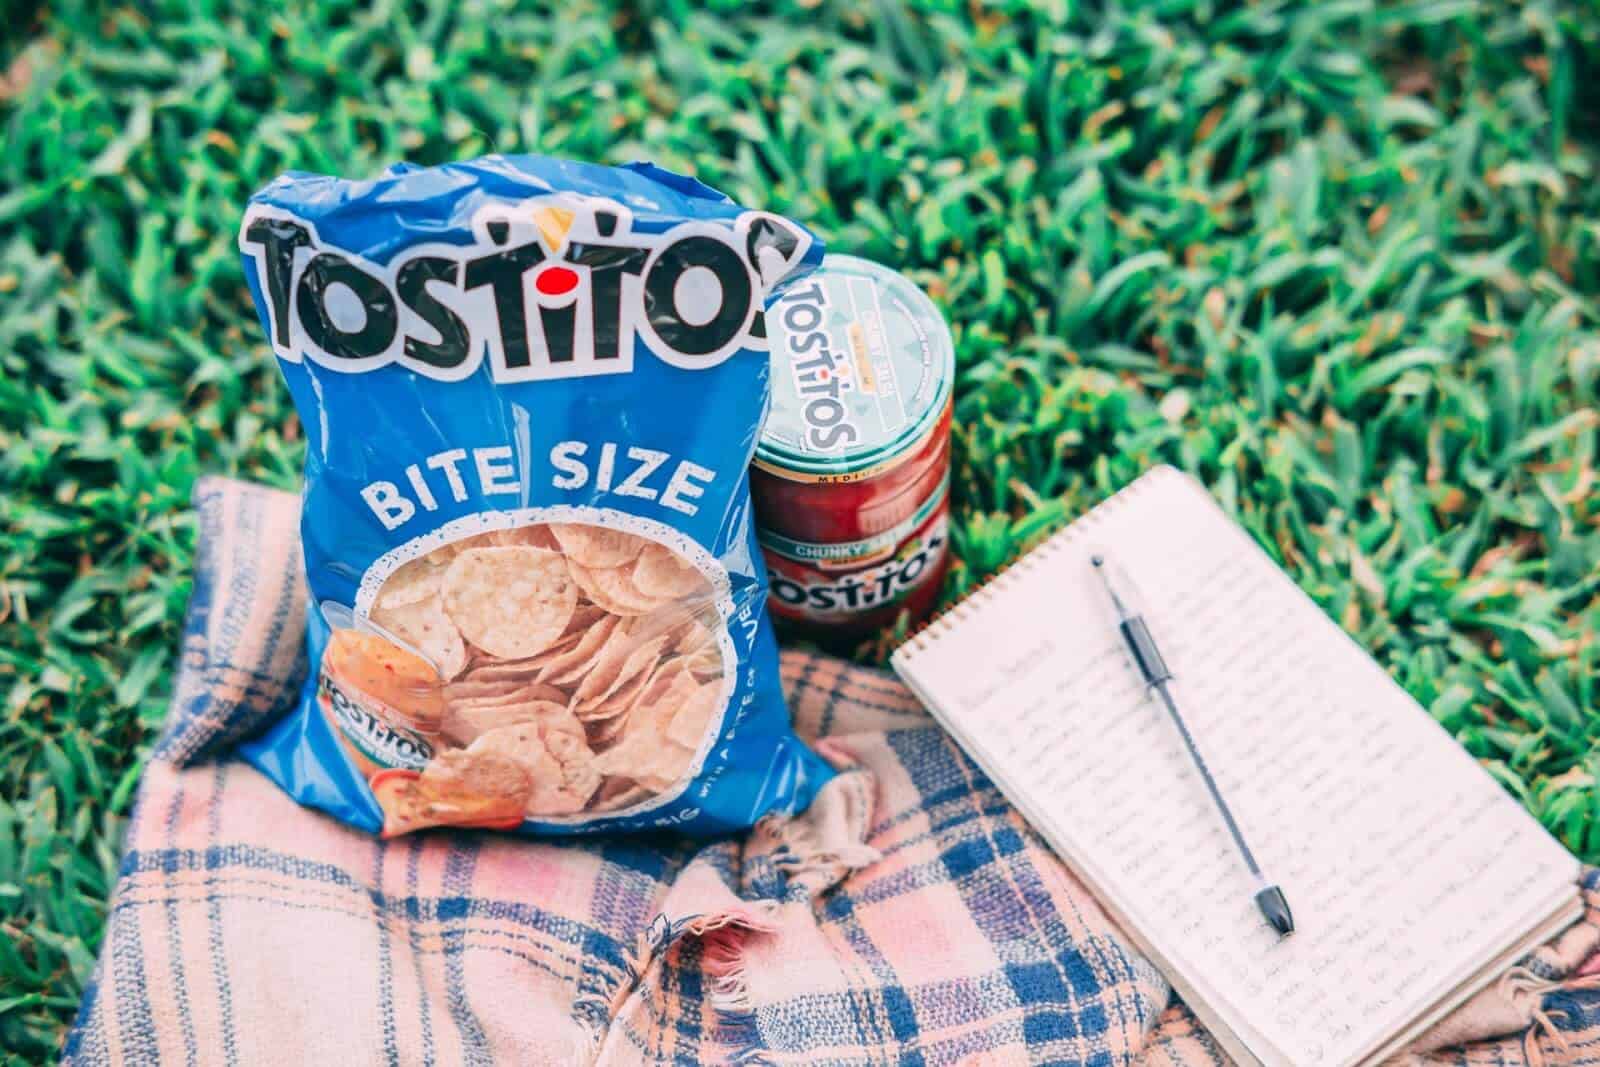 Tostitos chips and salsa next to blanket on the grass